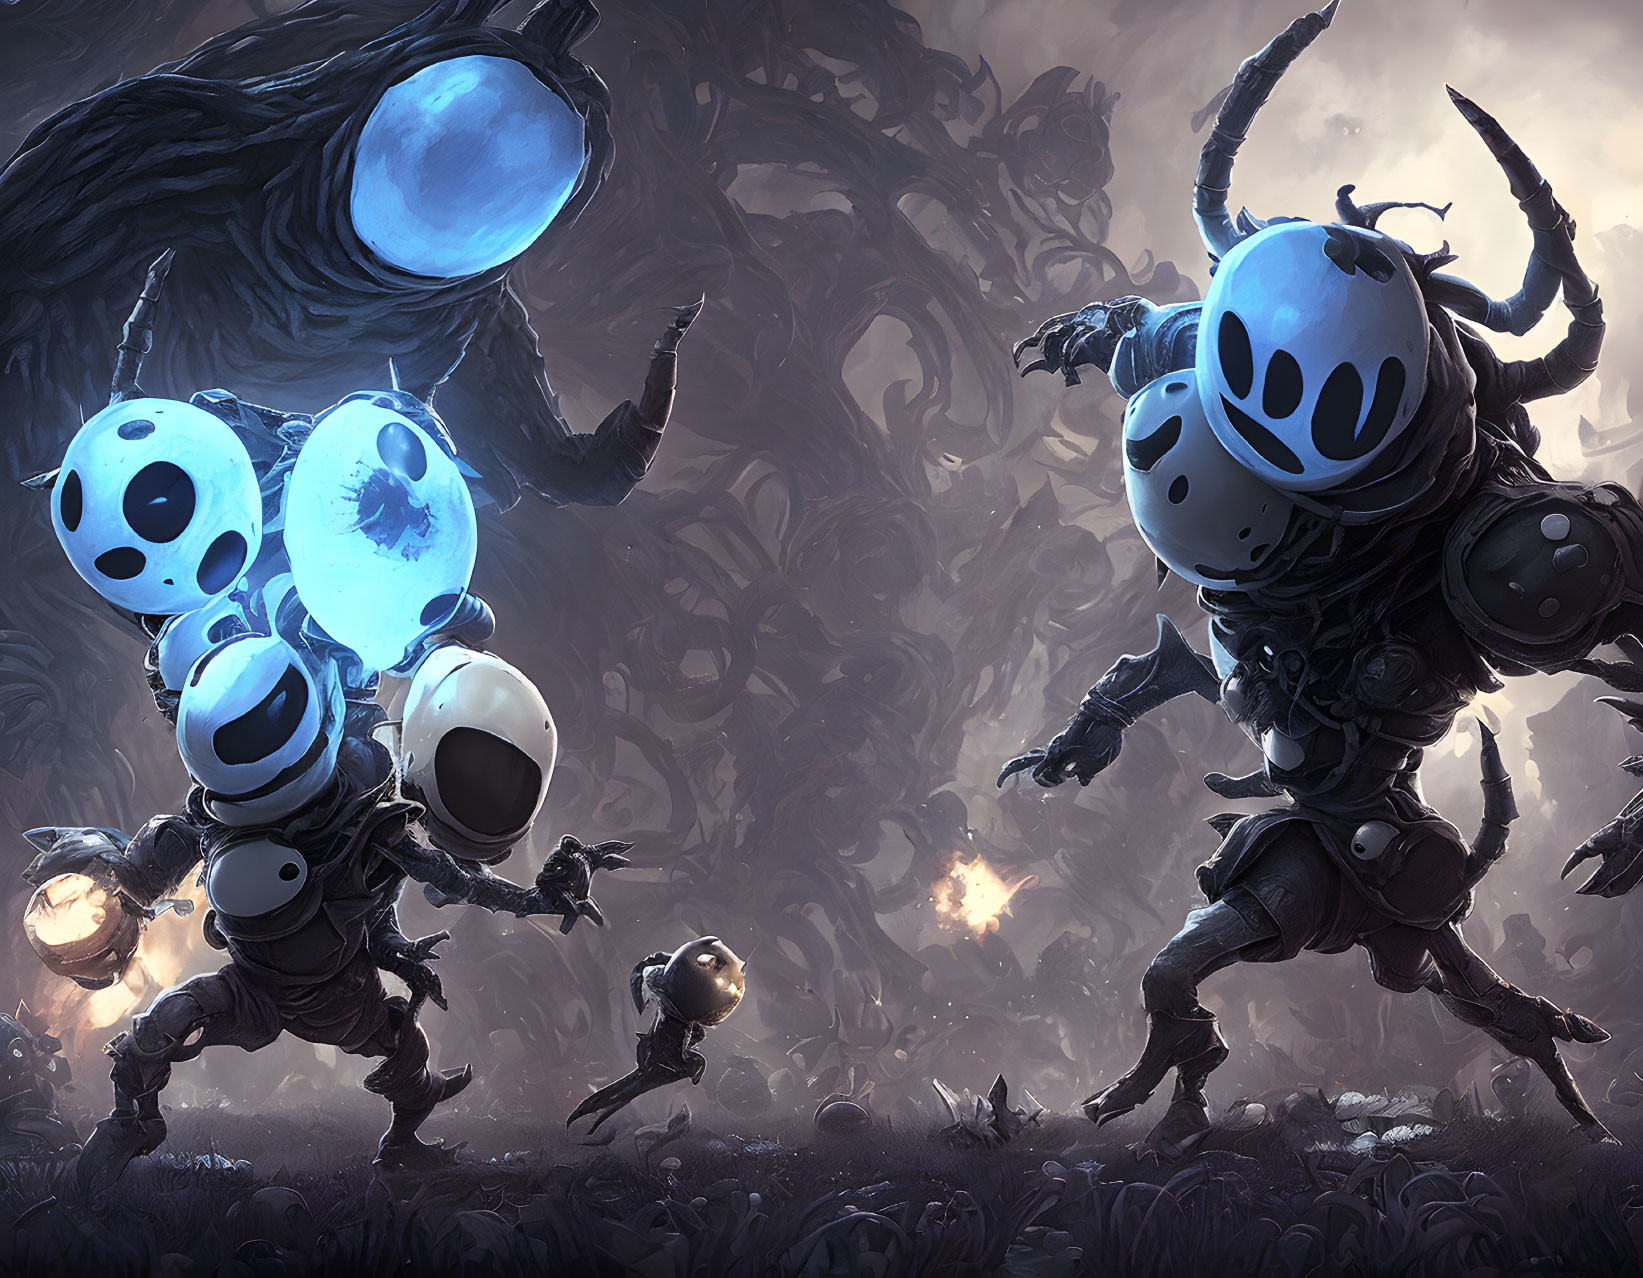 Armored beetle-like characters in epic battle in dark forest